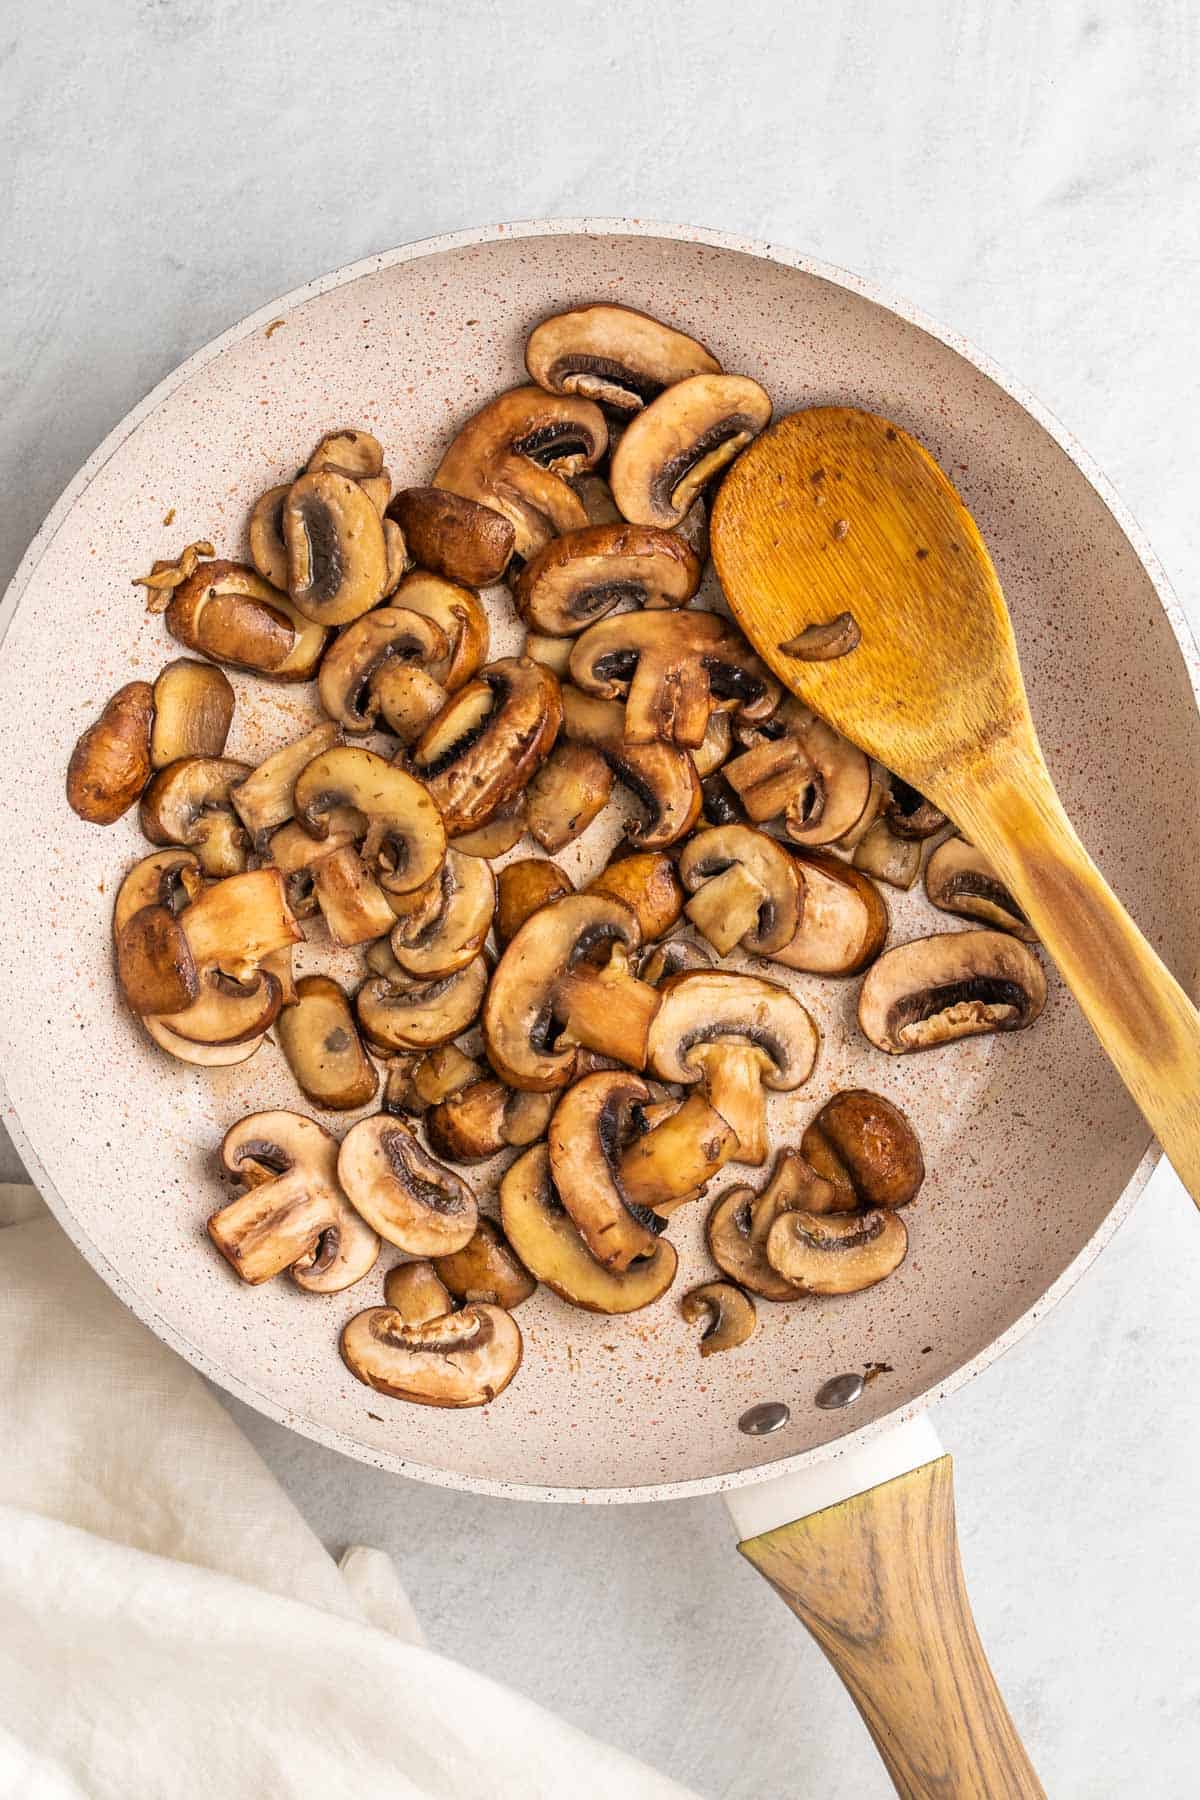 Mushrooms cooking in a pan with a wooden spoon, as seen from above